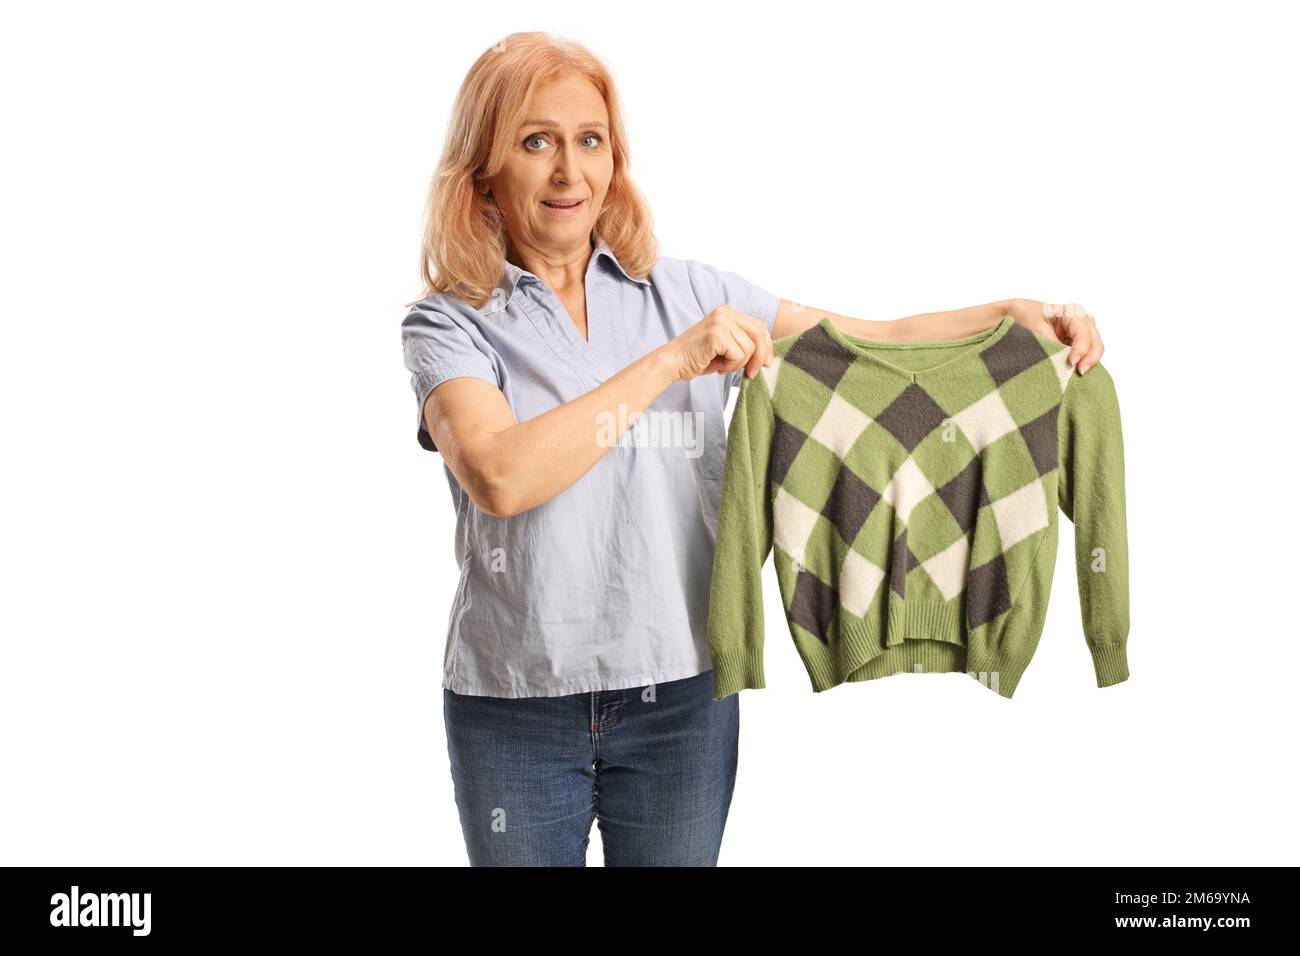 Upset Young Man With A Shrunken Blouse Stock Photo - Download